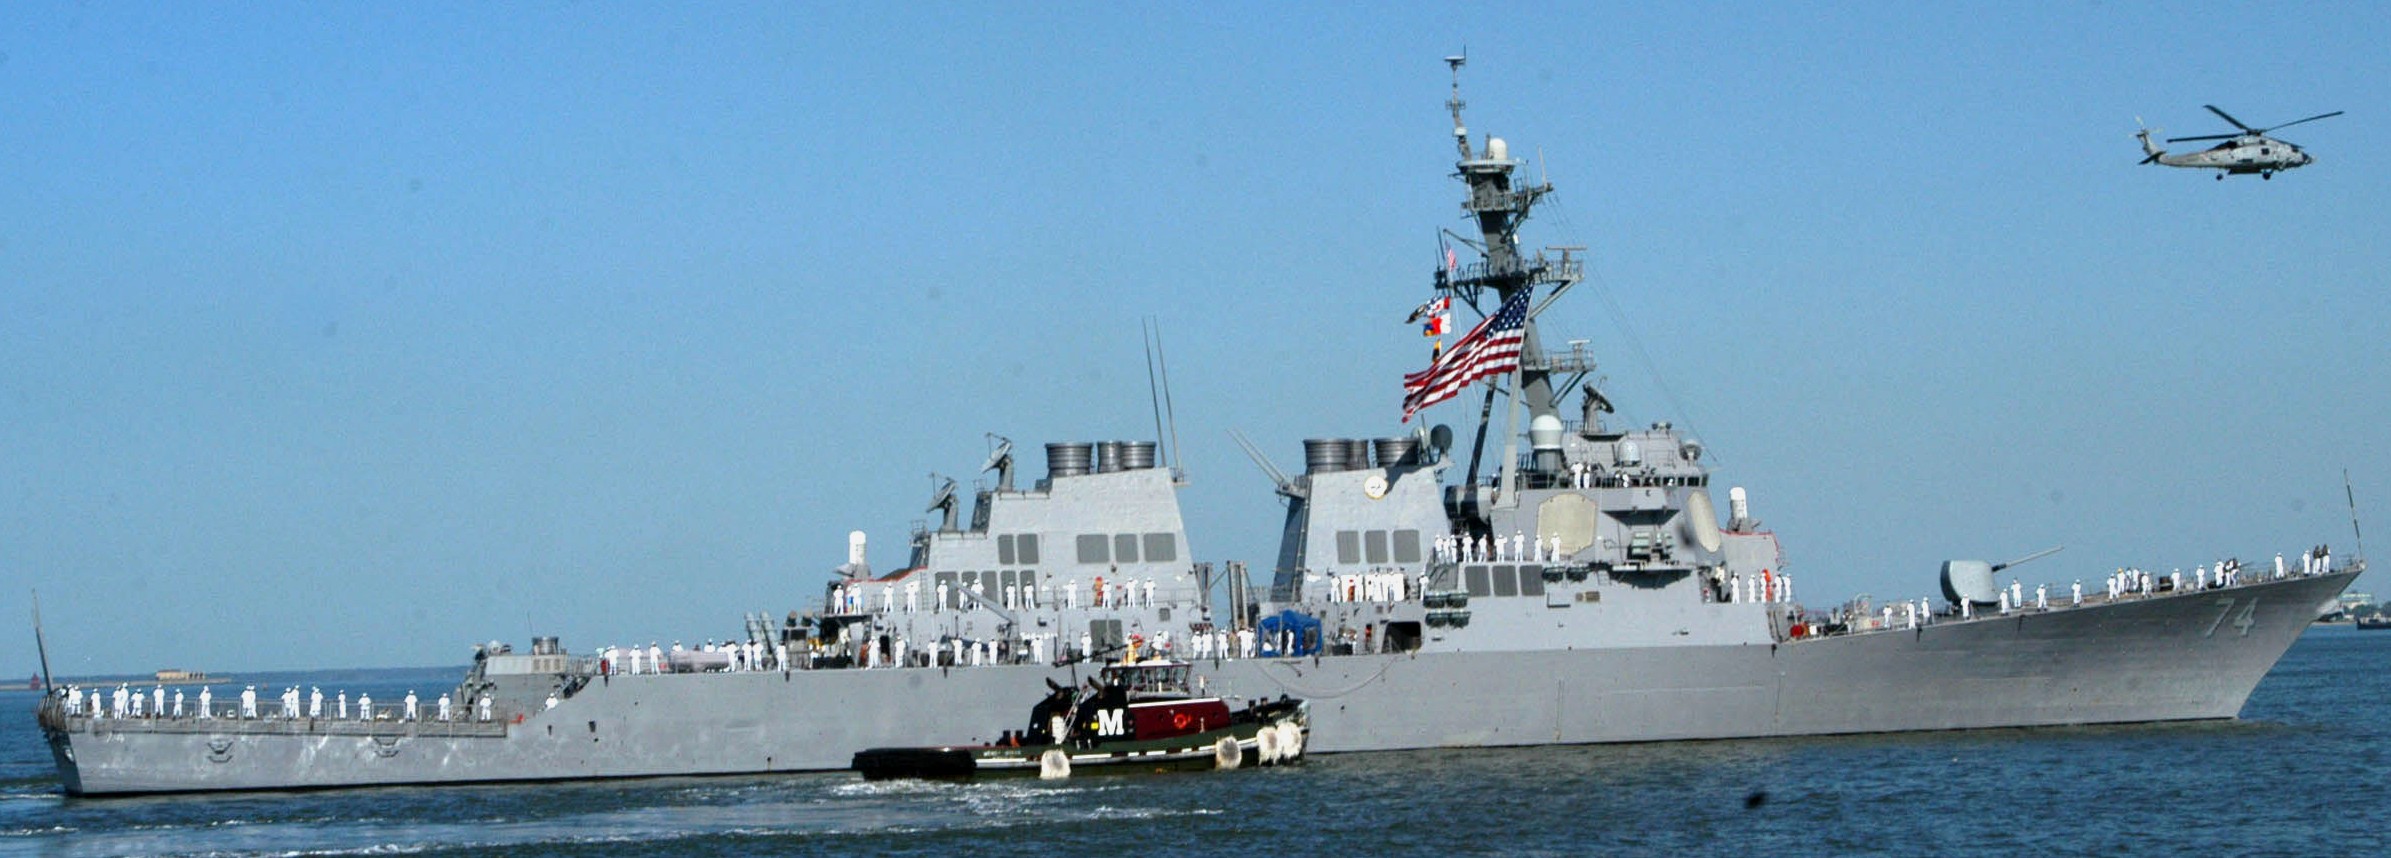 ddg-74 uss mcfaul guided missile destroyer arleigh burke class aegis bmd 43